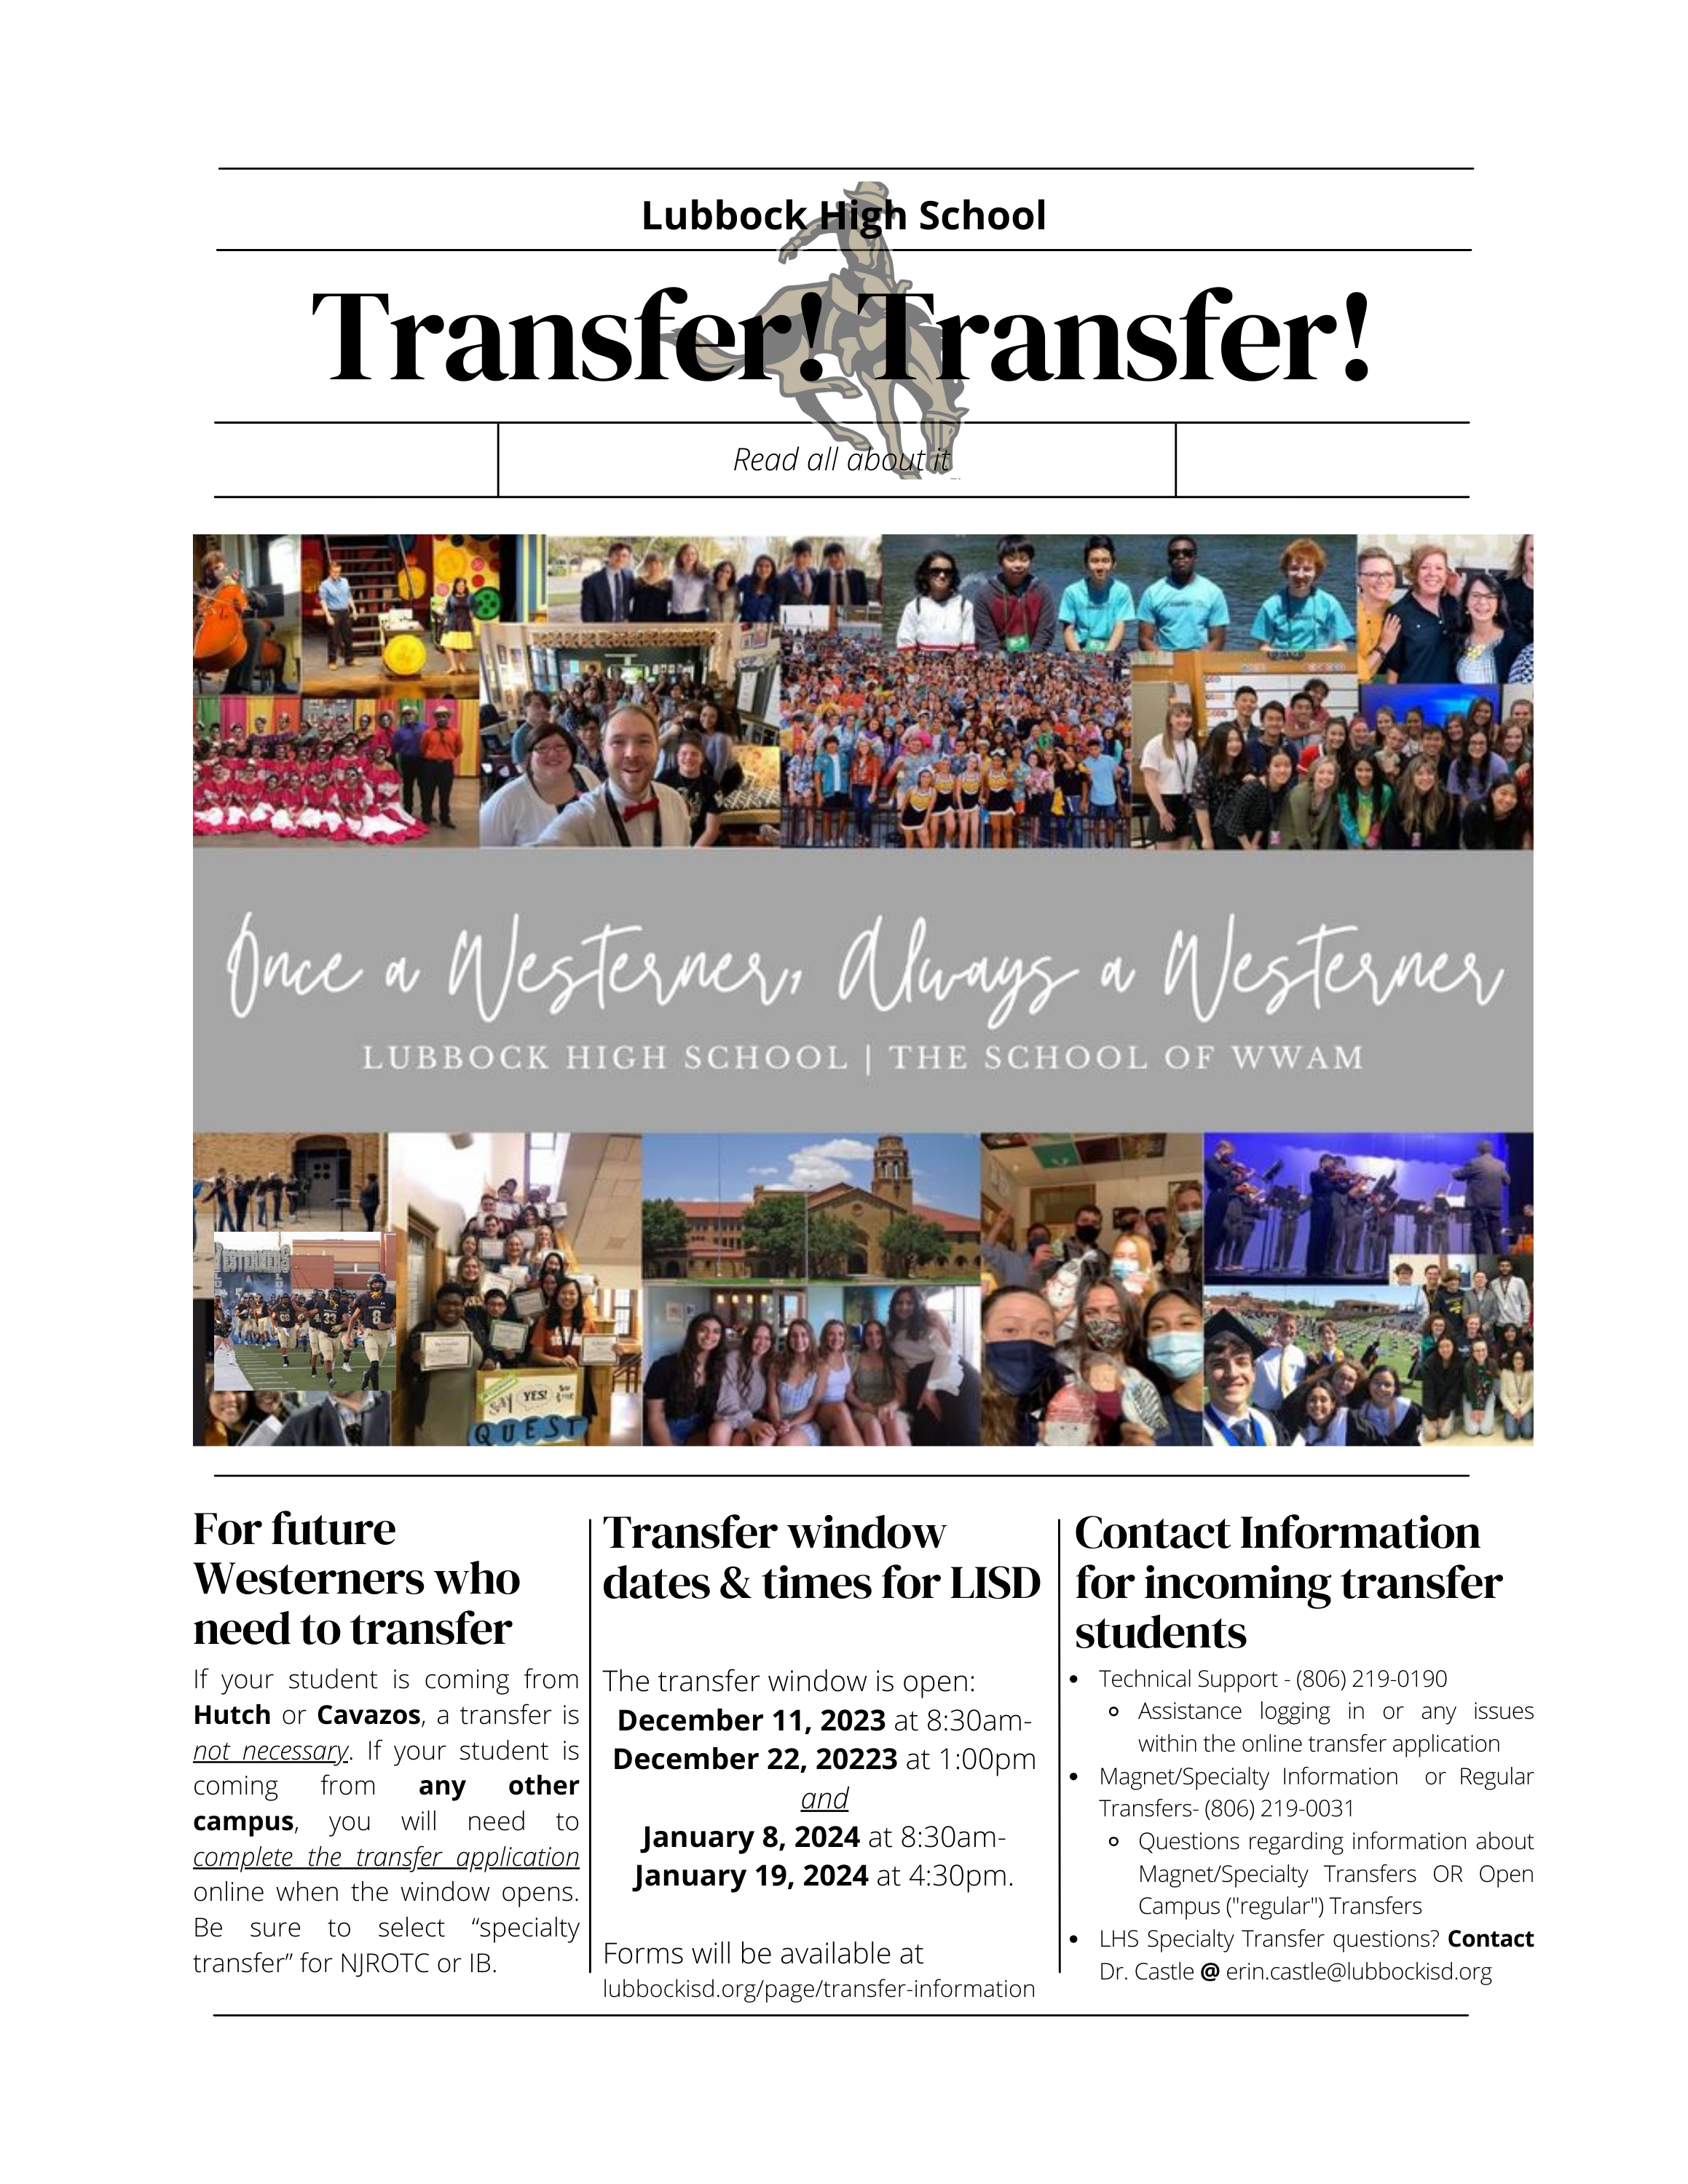 Transfer! Transfer!  For future Westerners who need to transfer Read all about it  Lubbock High School  If your student is coming from Hutch or Cavazos, a transfer is not necessary. If your student is coming from any other campus, you will need to complete the transfer application online when the window opens. Be sure to select “specialty transfer” for NJROTC or IB.  The transfer window is open:  December 11, 2023 at 8:30am- December 22, 20223 at 1:00pm and   January 8, 2024 at 8:30am- January 19, 2024 at 4:30pm.    Forms will be available at  lubbockisd.org/page/transfer-information  Transfer window dates & times for LISD Technical Support - (806) 219-0190 Assistance logging in or any issues within the online transfer application Magnet/Specialty Information  or Regular Transfers- (806) 219-0031 Questions regarding information about Magnet/Specialty Transfers OR Open Campus ("regular") Transfers LHS Specialty Transfer questions? Contact Dr. Castle @ erin.castle@lubbockisd.org